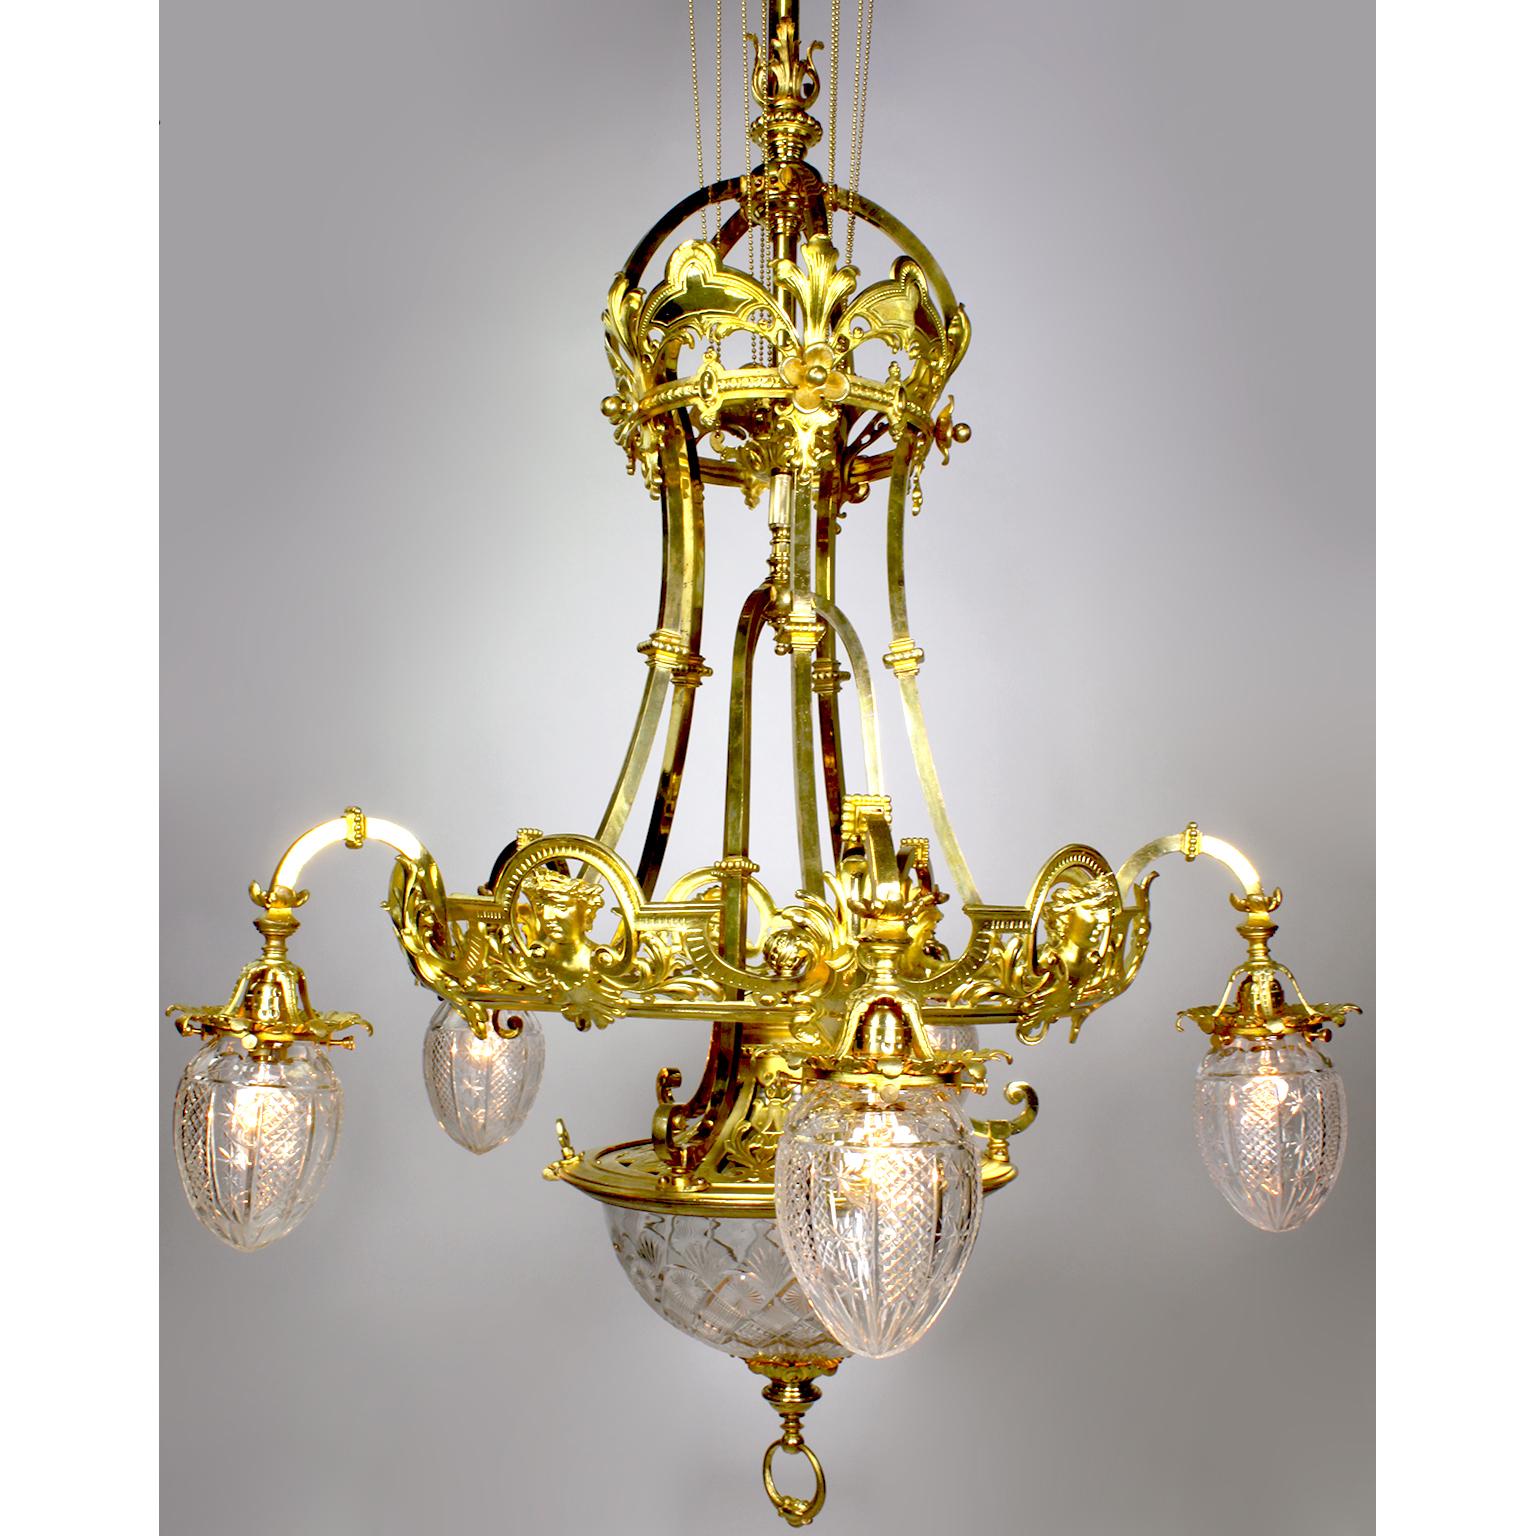 A fine and large French 19th-20th century Belle Époque gilt-bronze and cut-glass six-light figural chandelier. The elongated gilt-bronze body with a pierced apron and silvered lining with a beaded brass chain suspension around pulleys, decorated